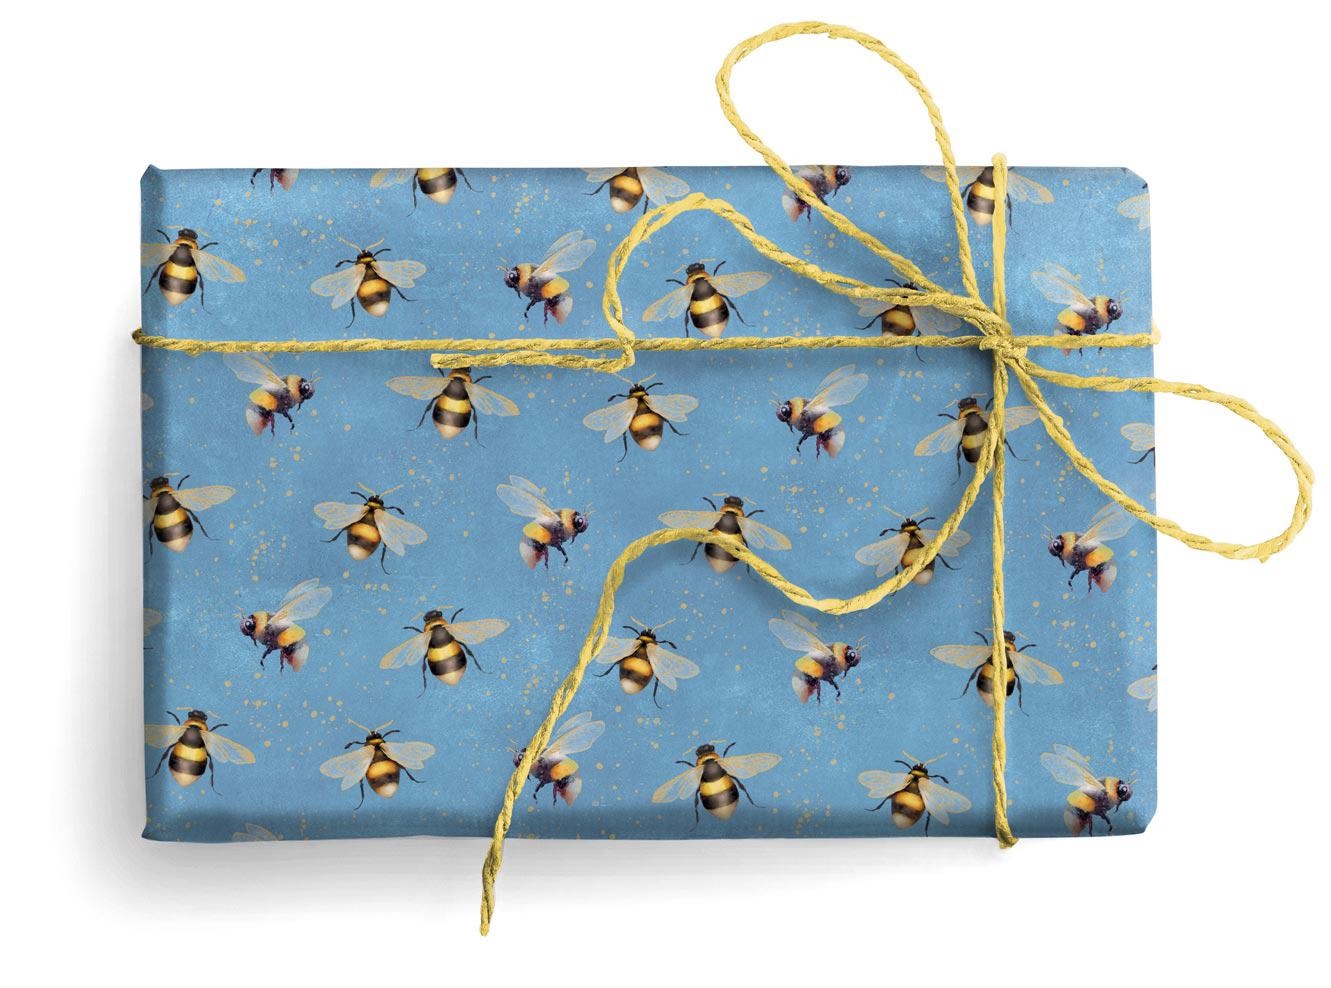 Bumble Bees Wrapping Paper, 2 Sheets 20x27